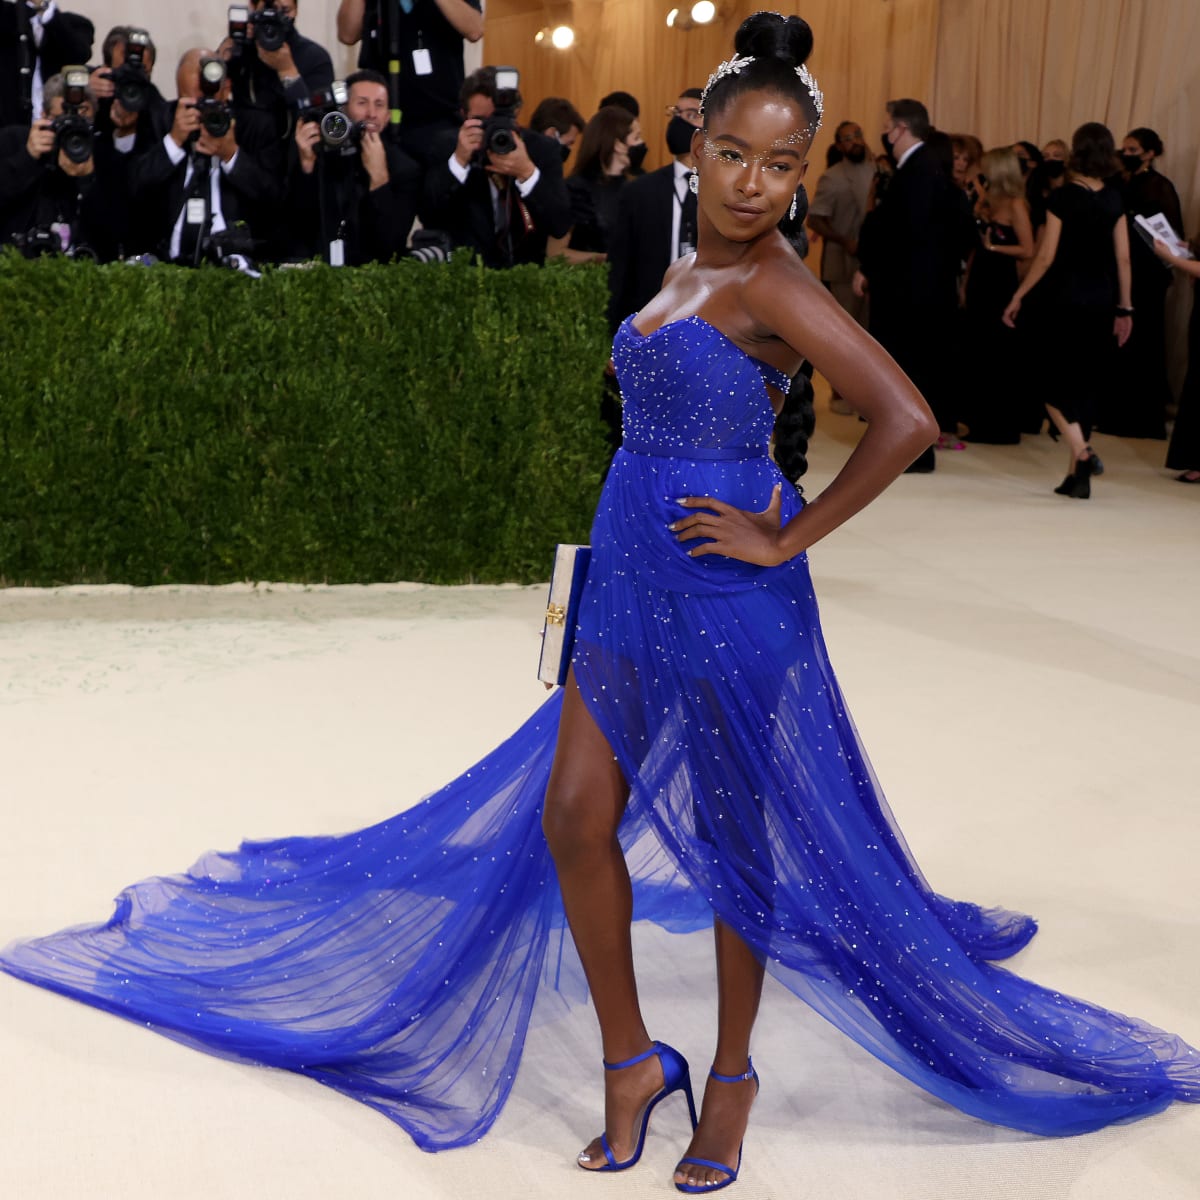 2021 Met Gala: Who's Invited, Date, Red Carpet, What to Know – WWD